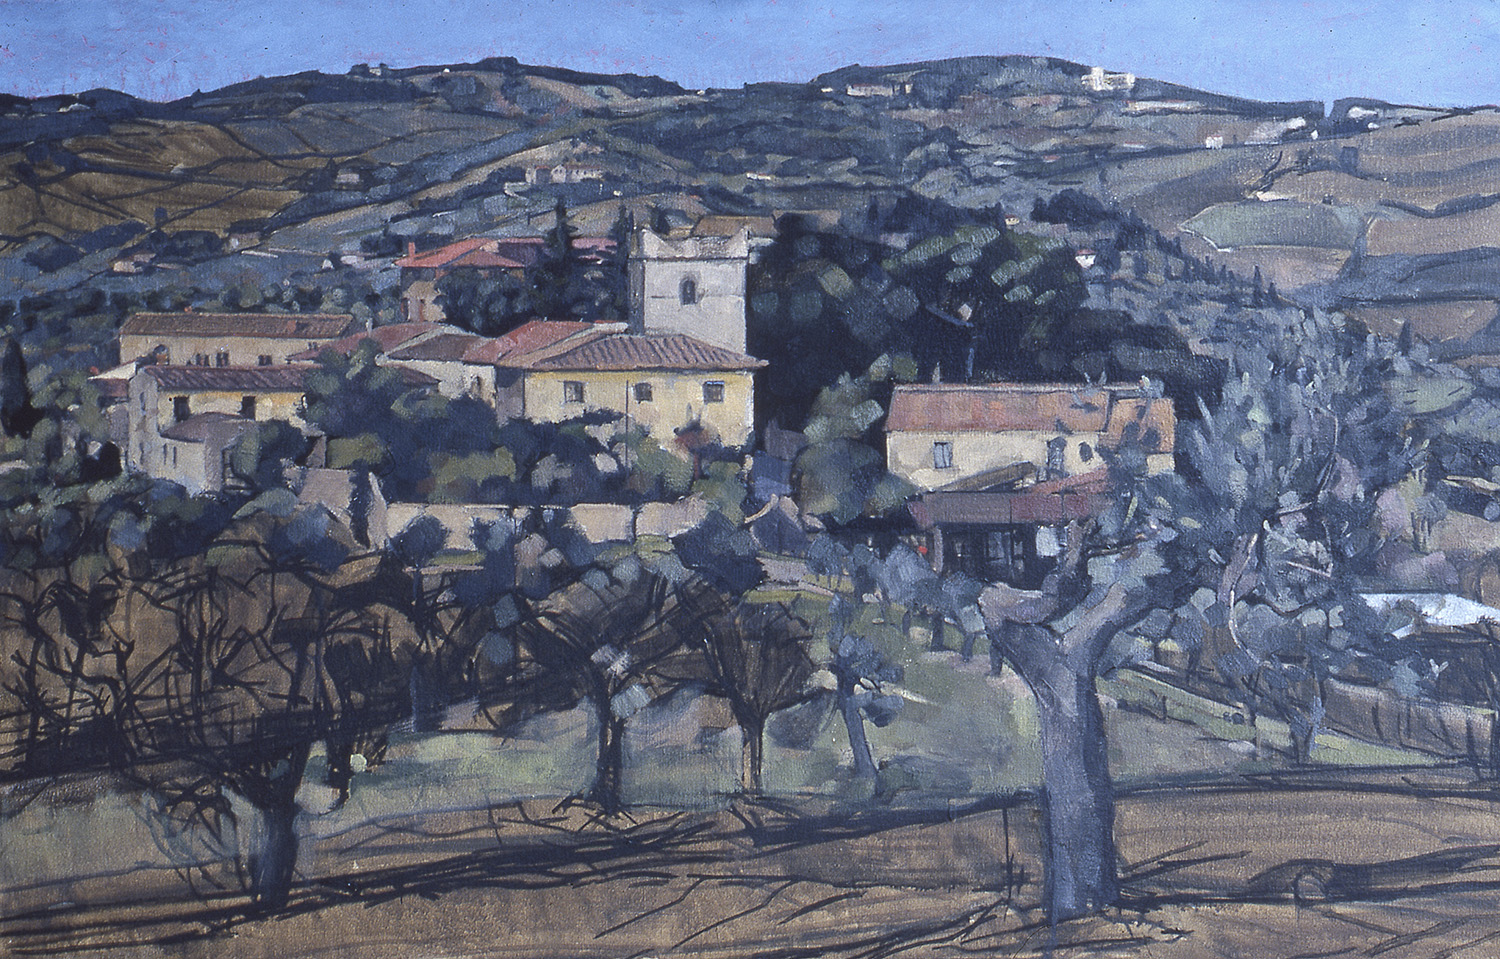 Canonica, near Florence municipal cemetery by Frederick Ortner (larger)